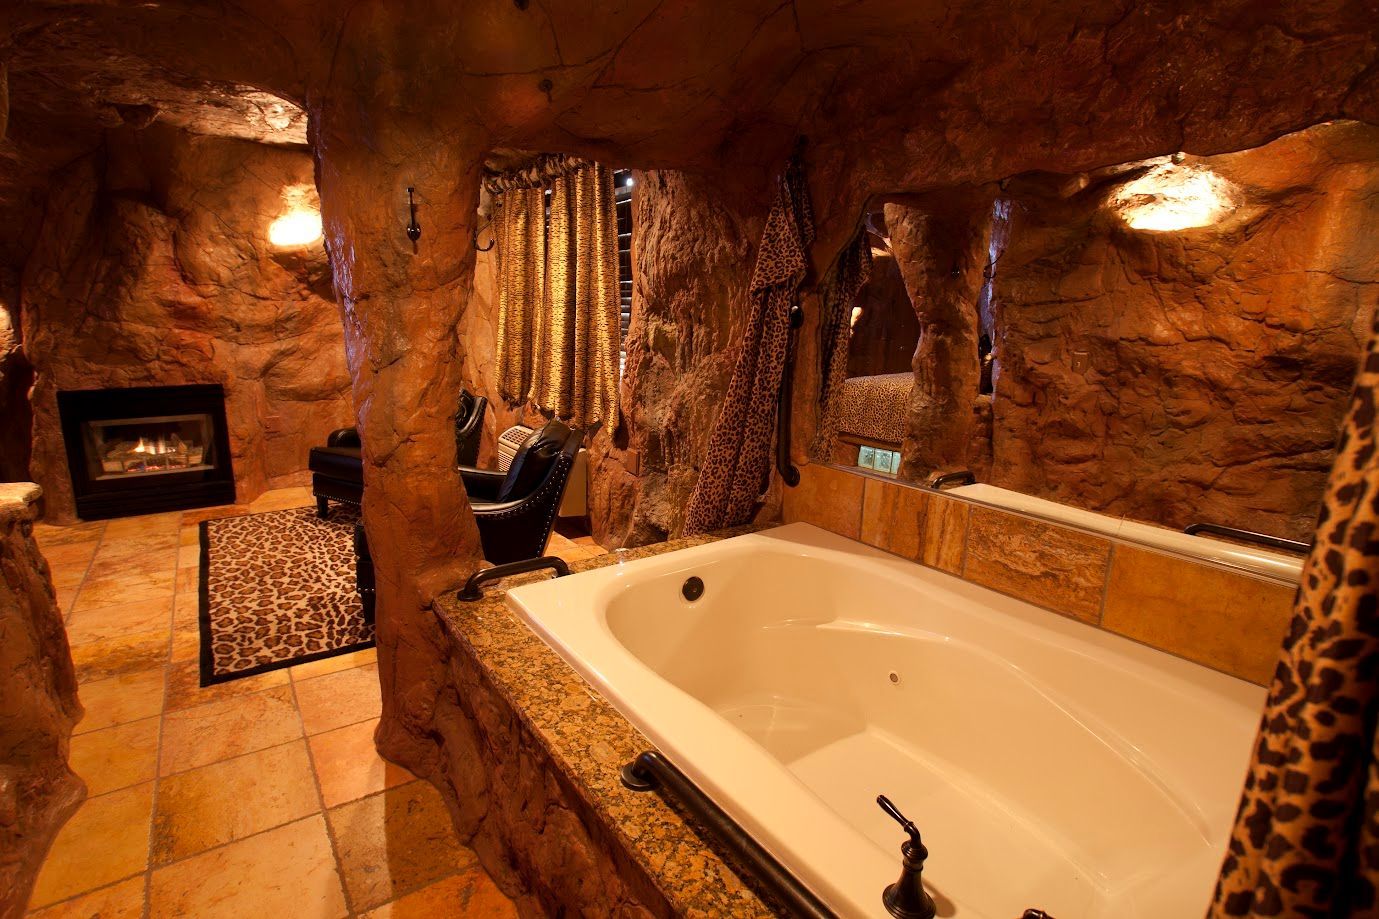 A bathtub in a cave with a leopard print curtain